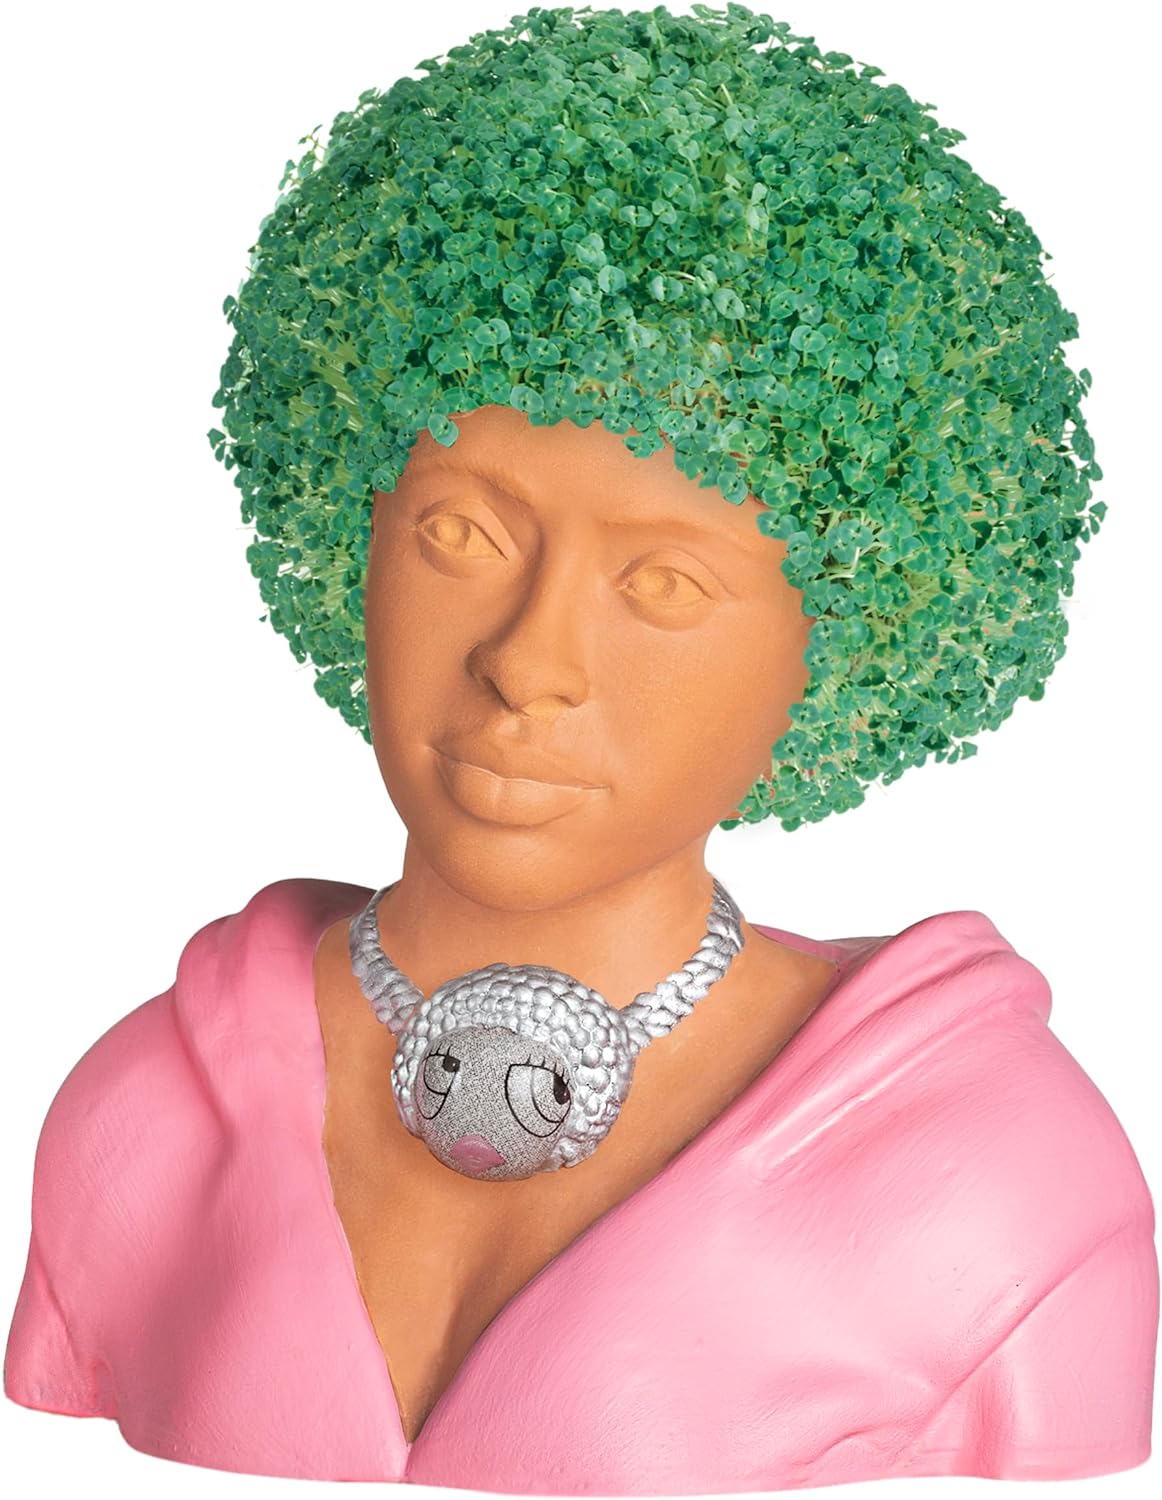 THE ICE SPICE CHIA PET